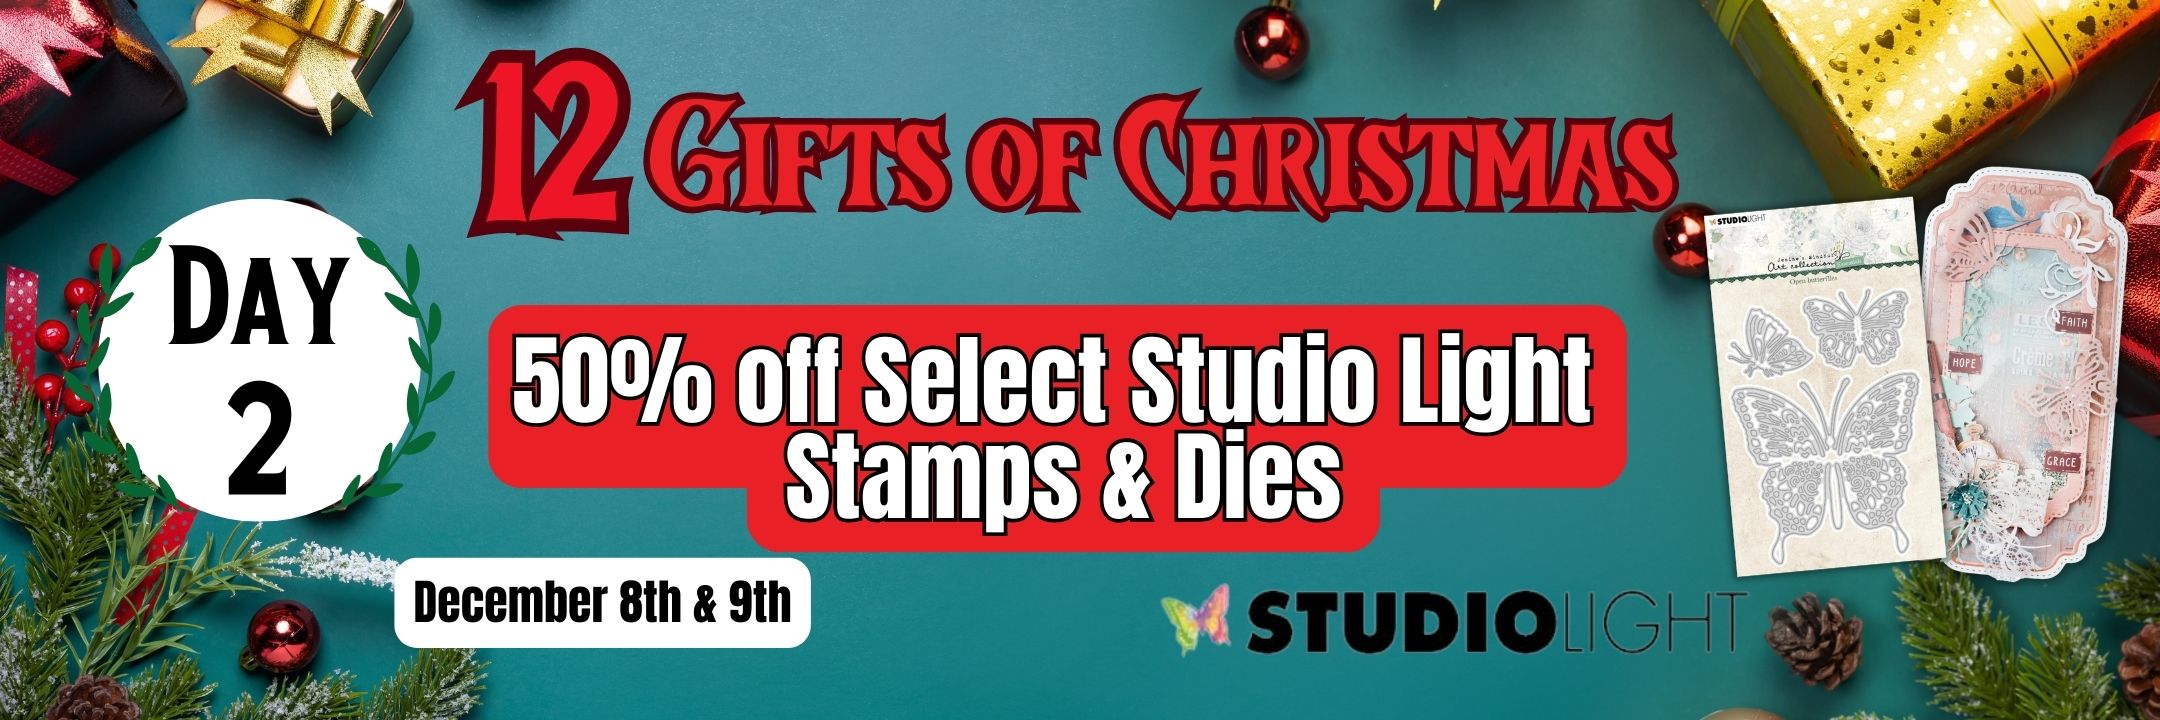 12 Gifts of Christmas -- Day 2 -- Studio Light Stamps & Dies